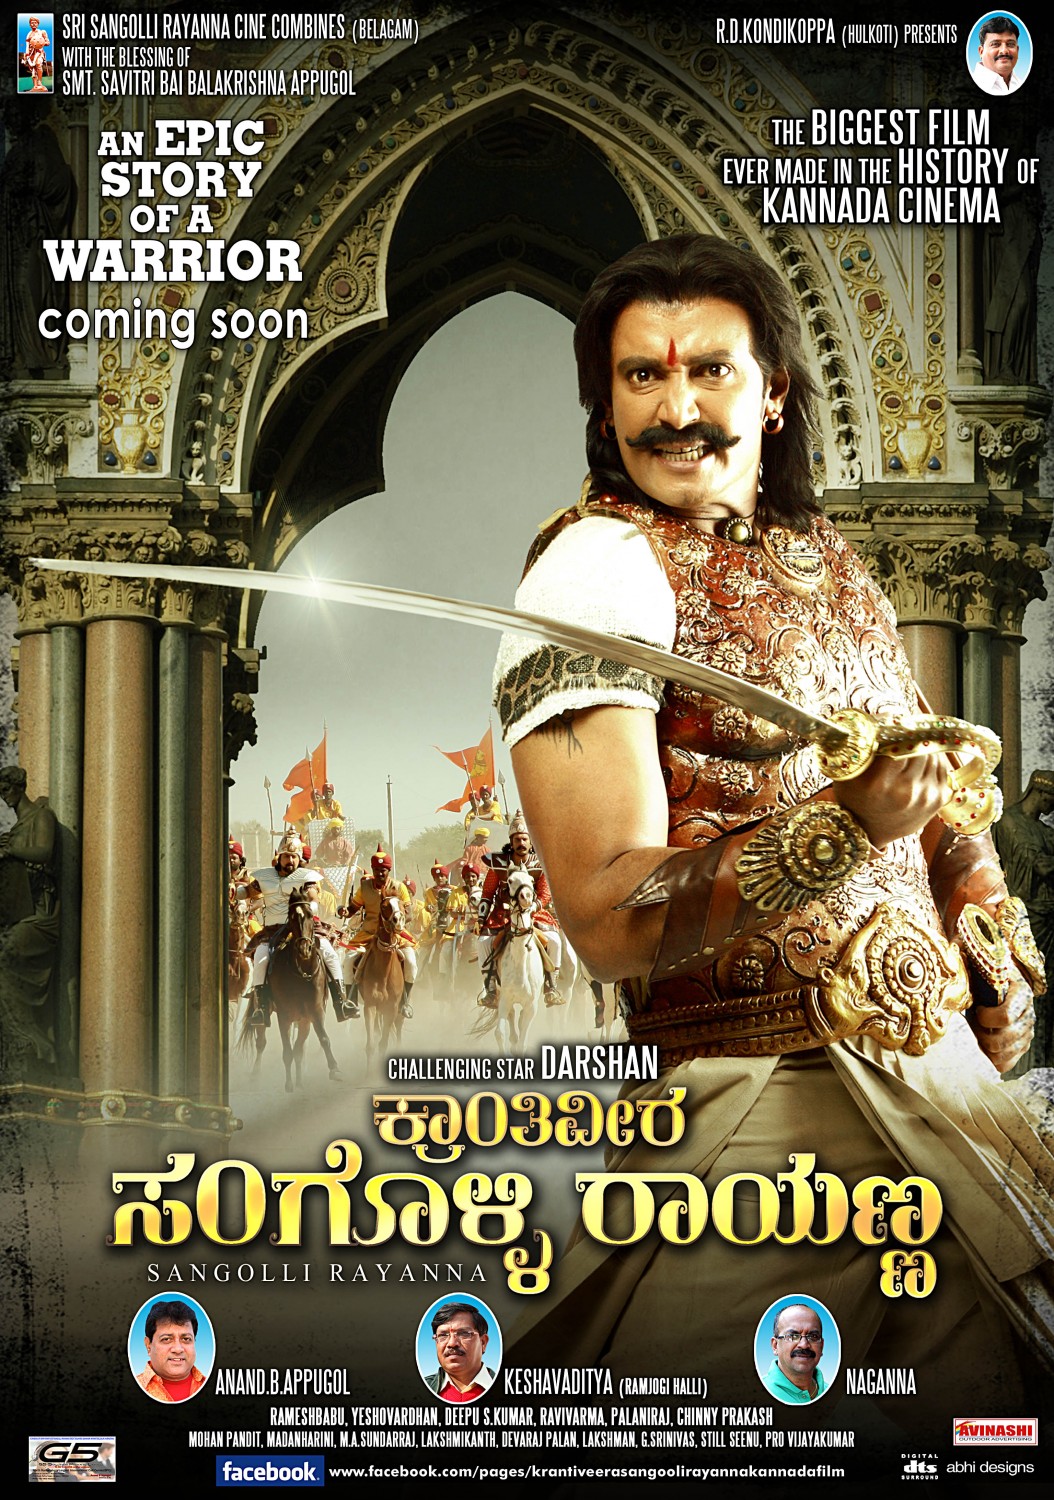 Extra Large Movie Poster Image for Sangolli Rayanna (#28 of 79)